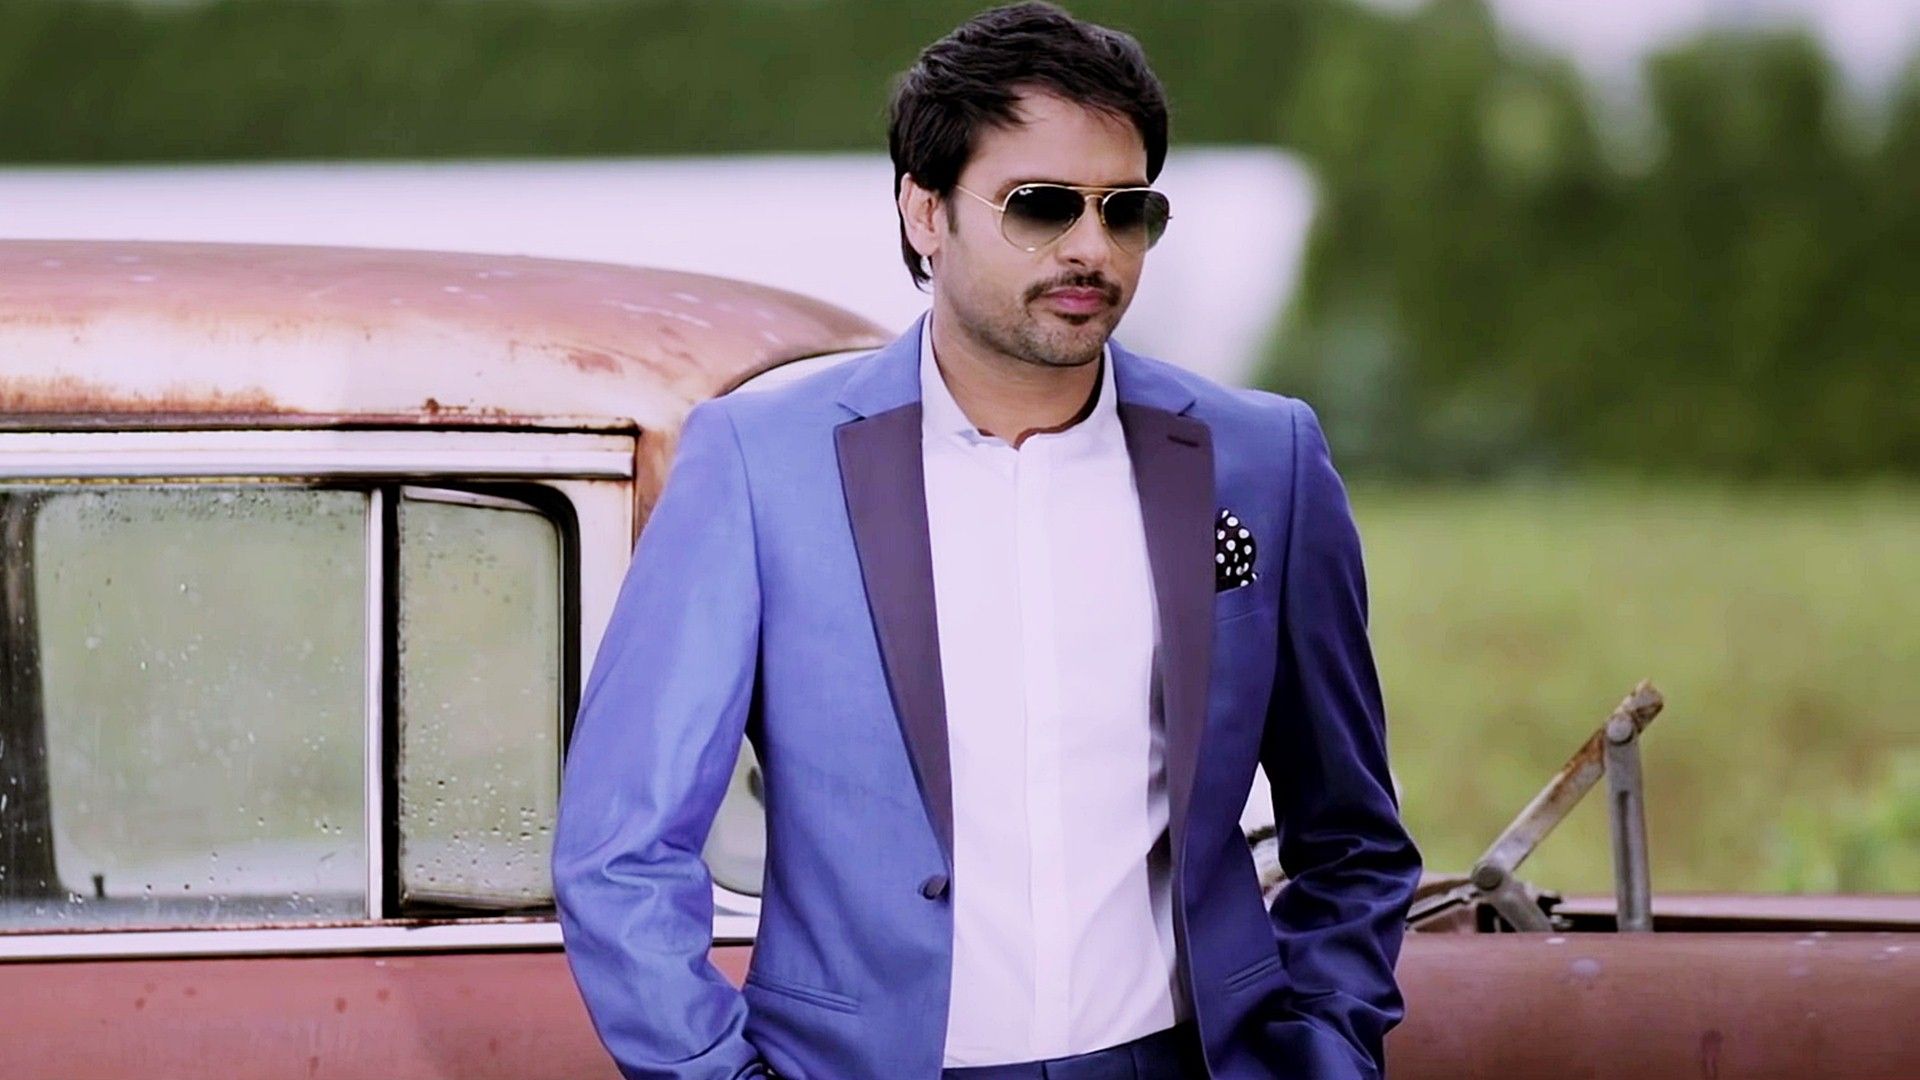 Amrinder Gill Wallpaper HD Background Free Download